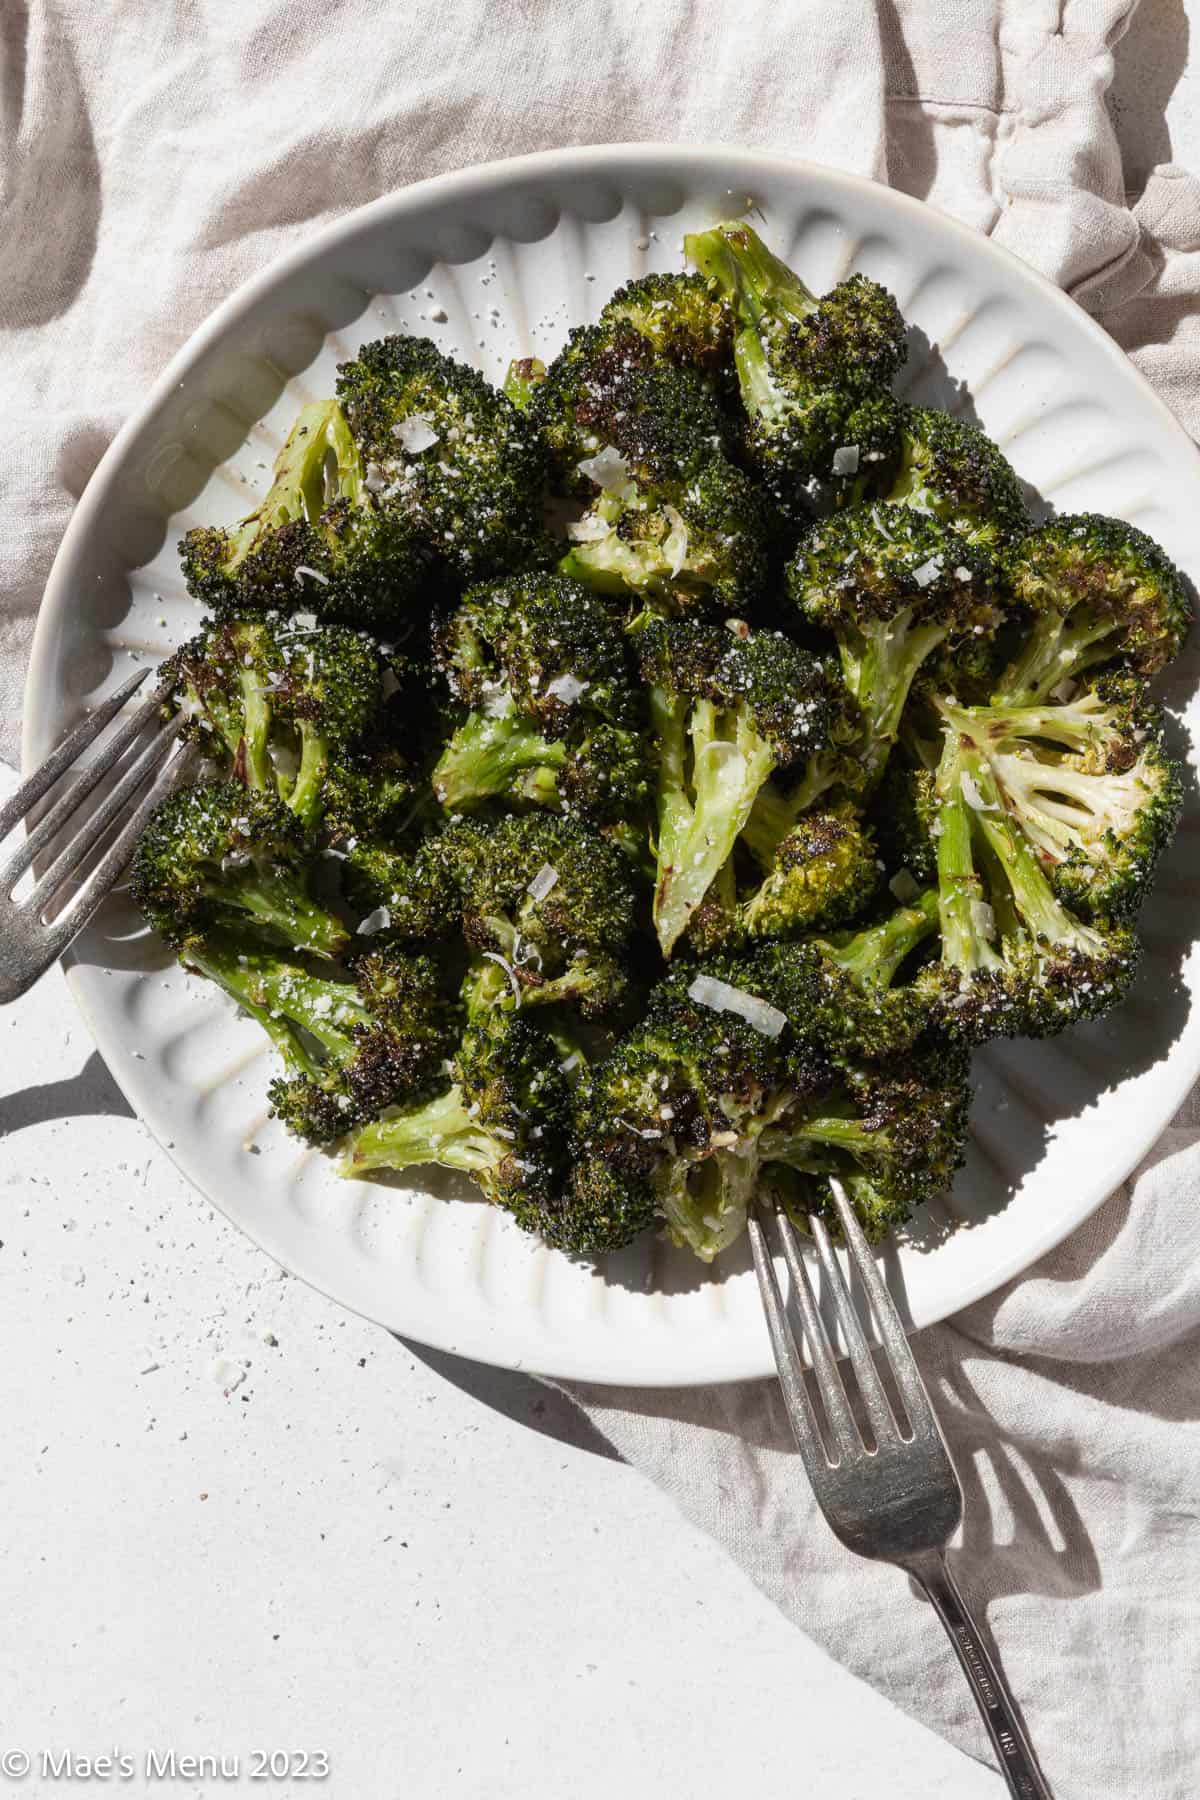 Overhead shot of a white plate of roasted broccoli with two forks.